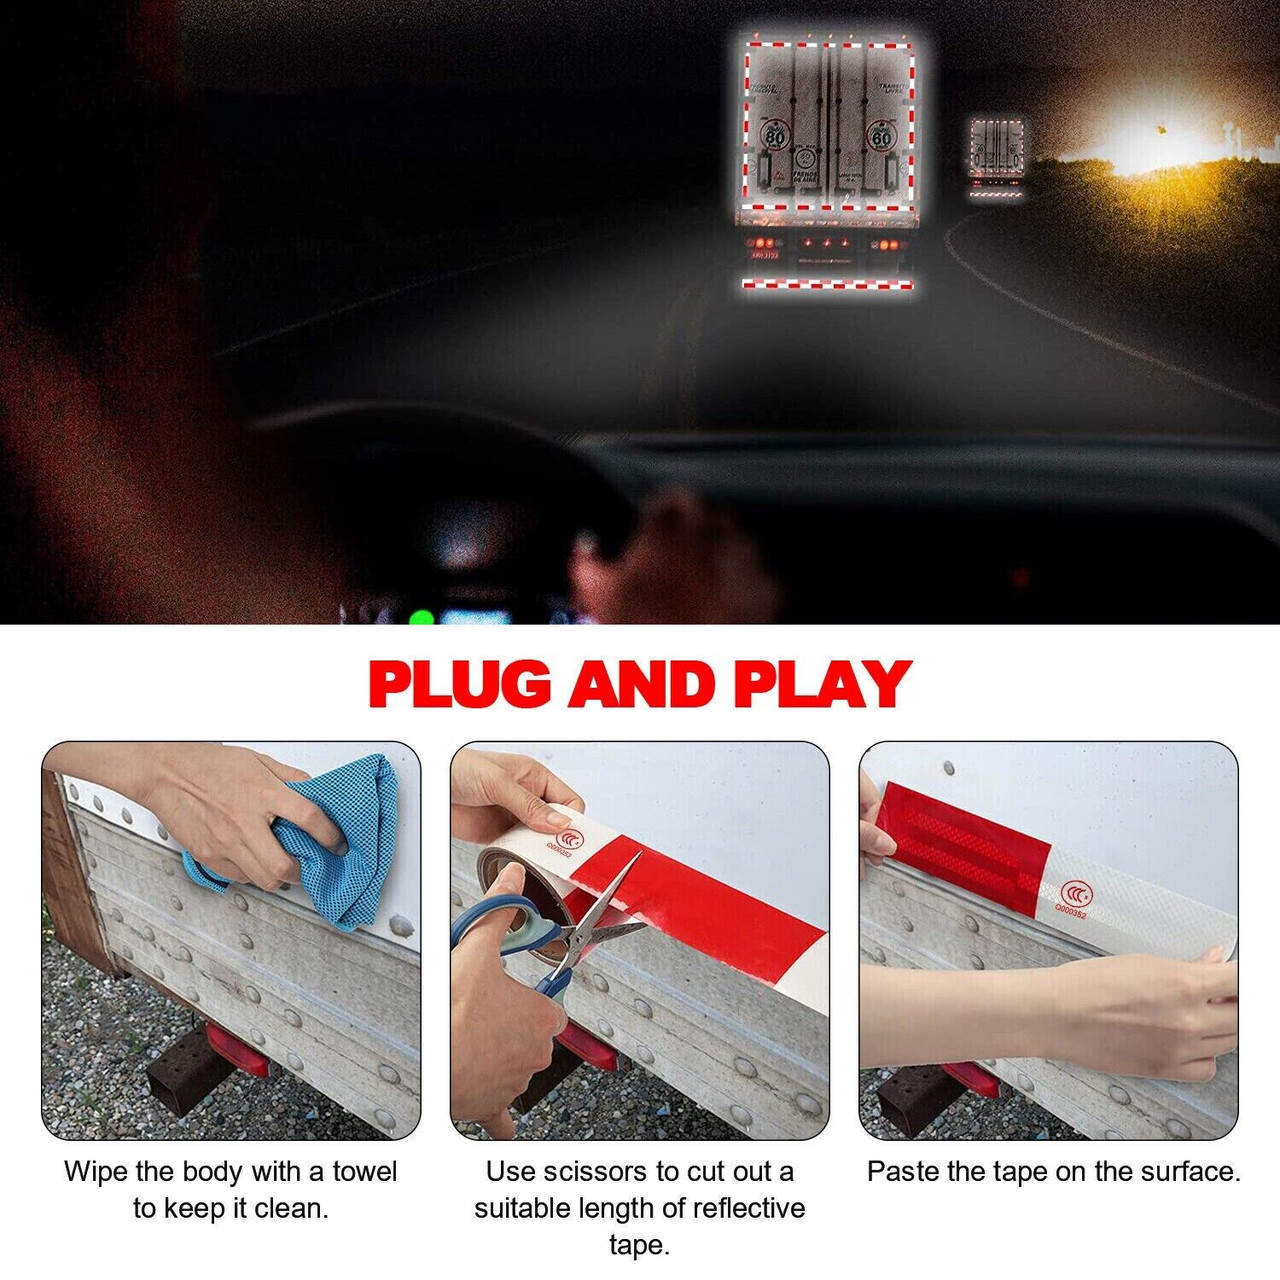 Reflective Trailer Safety Tape Conspicuity Tape Warning Sign Car Truck Red White